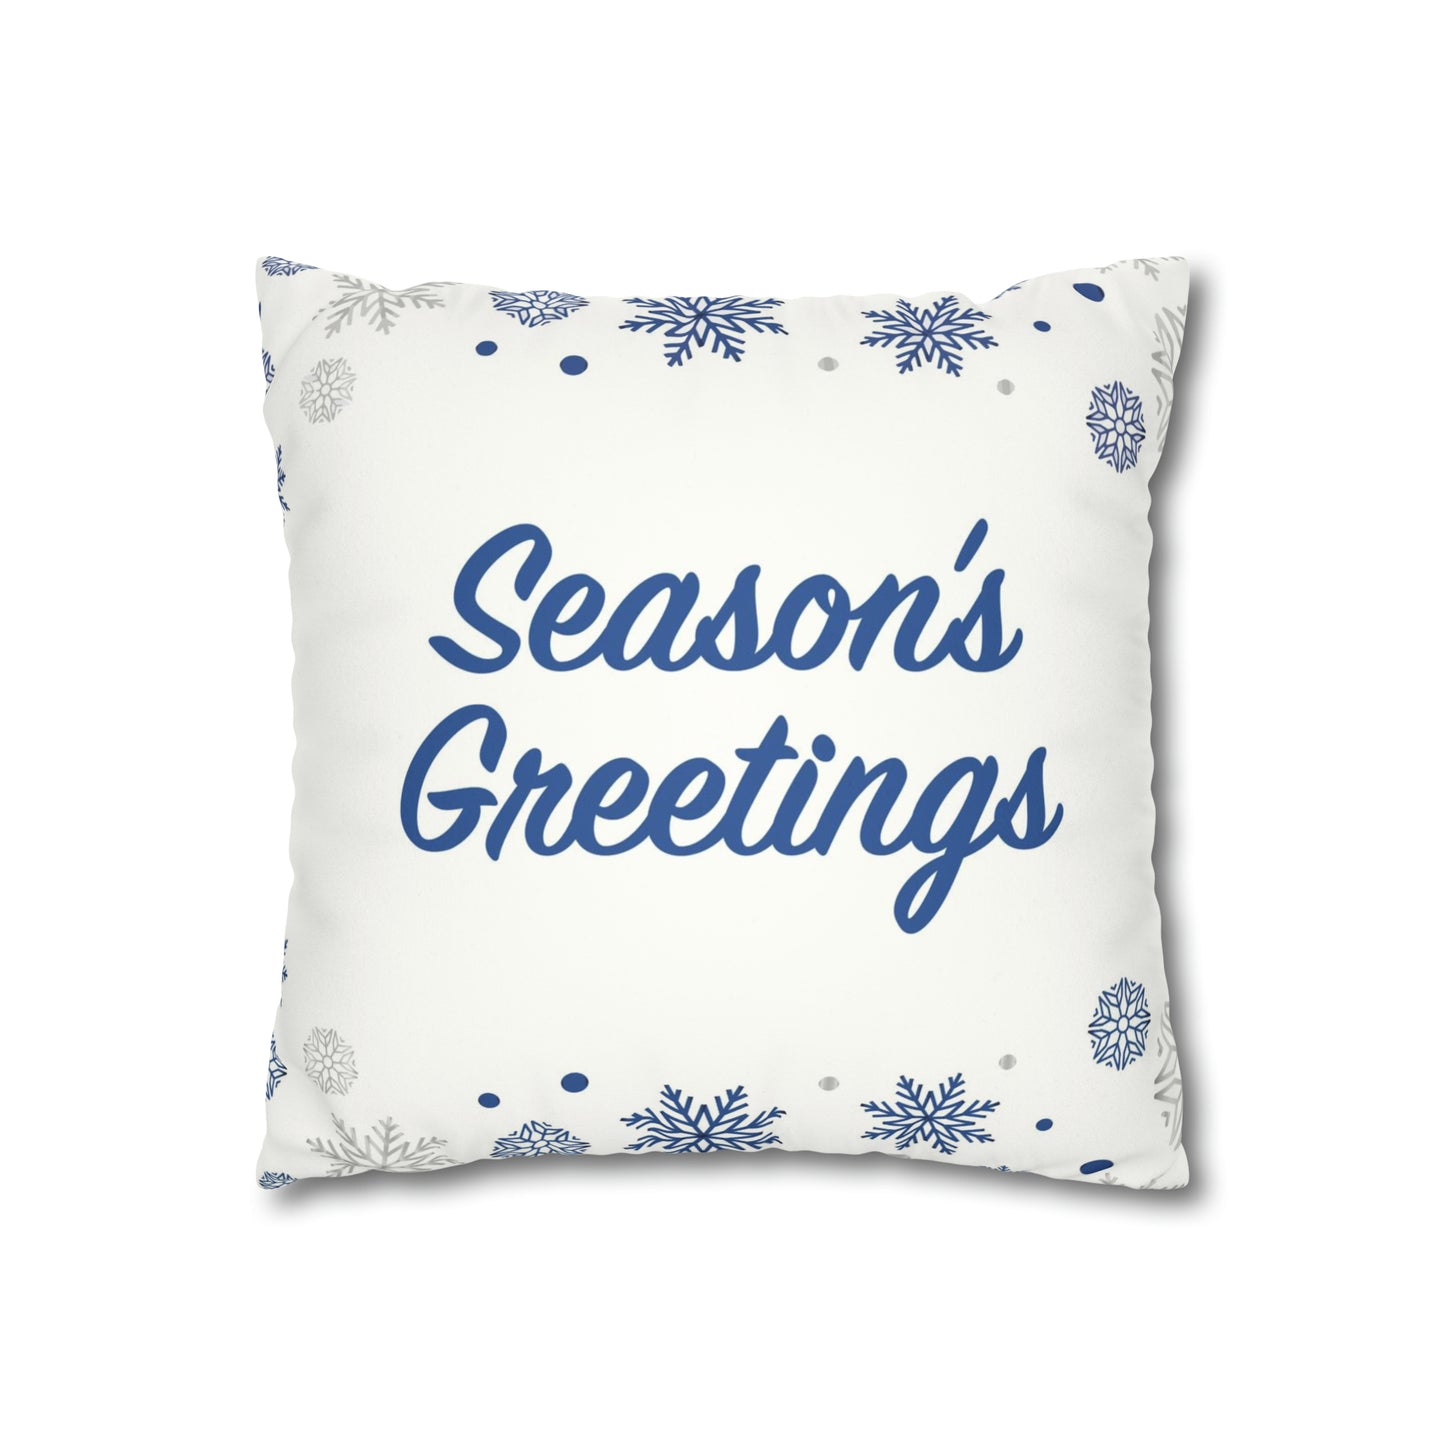 Season's Greetings Faux Suede Square Pillow Case, White